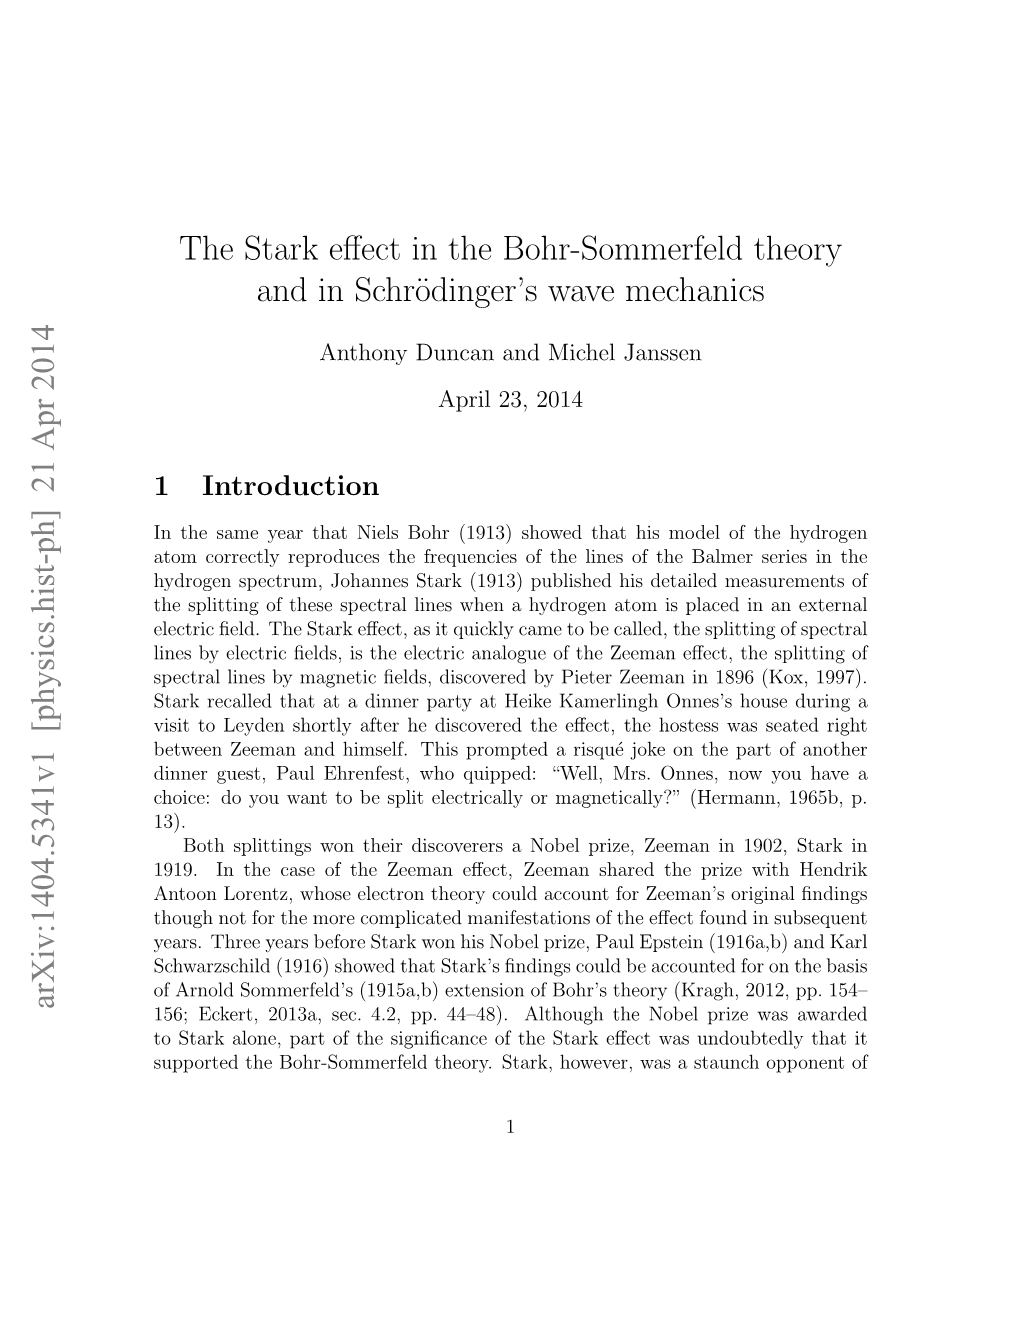 The Stark Effect in the Bohr-Sommerfeld Theory And